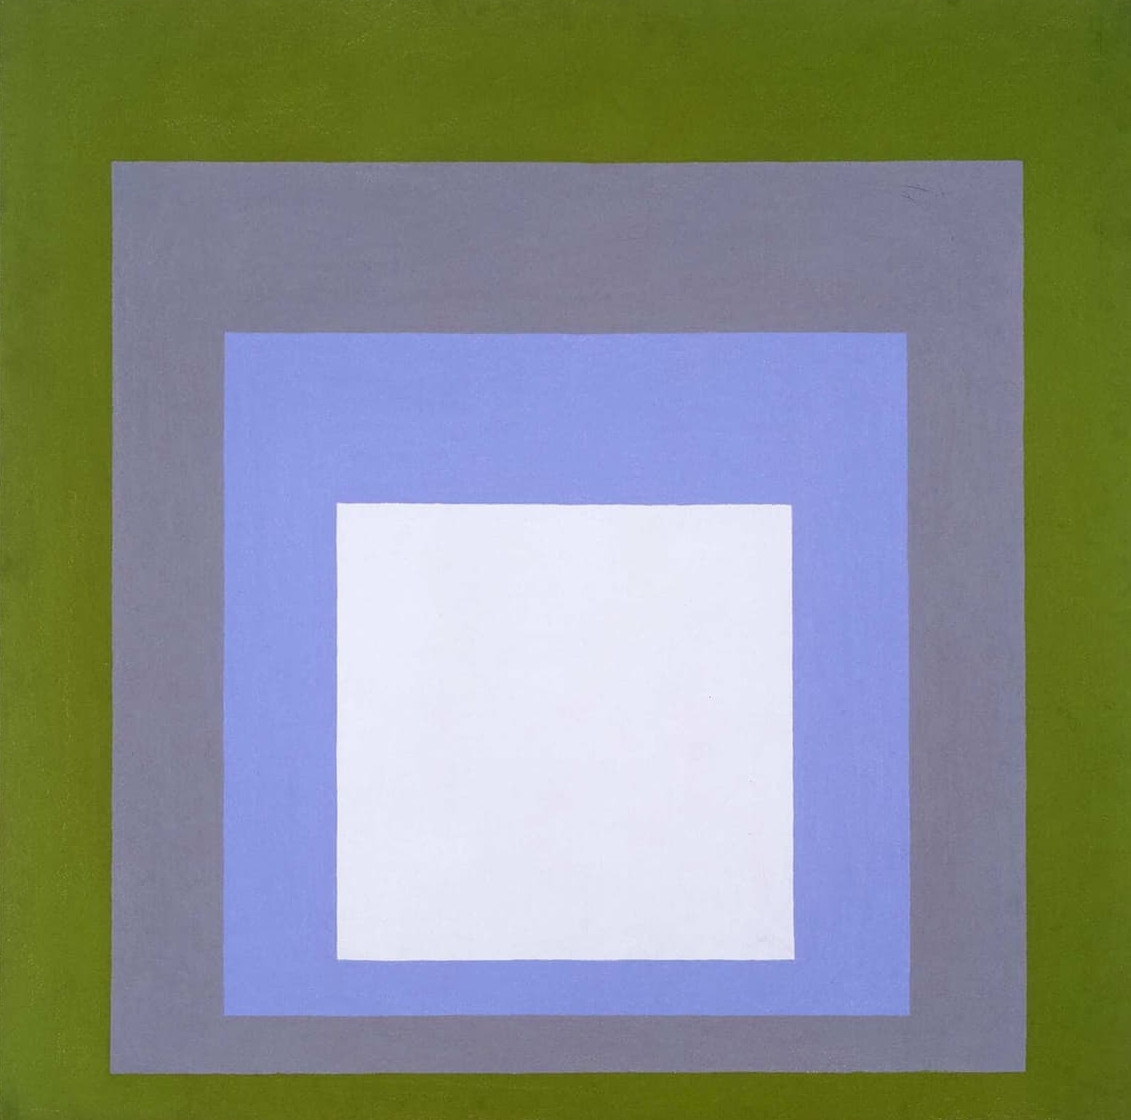 An abstract painting features a large square with six smaller squares, each a different color, layered on top of each other.